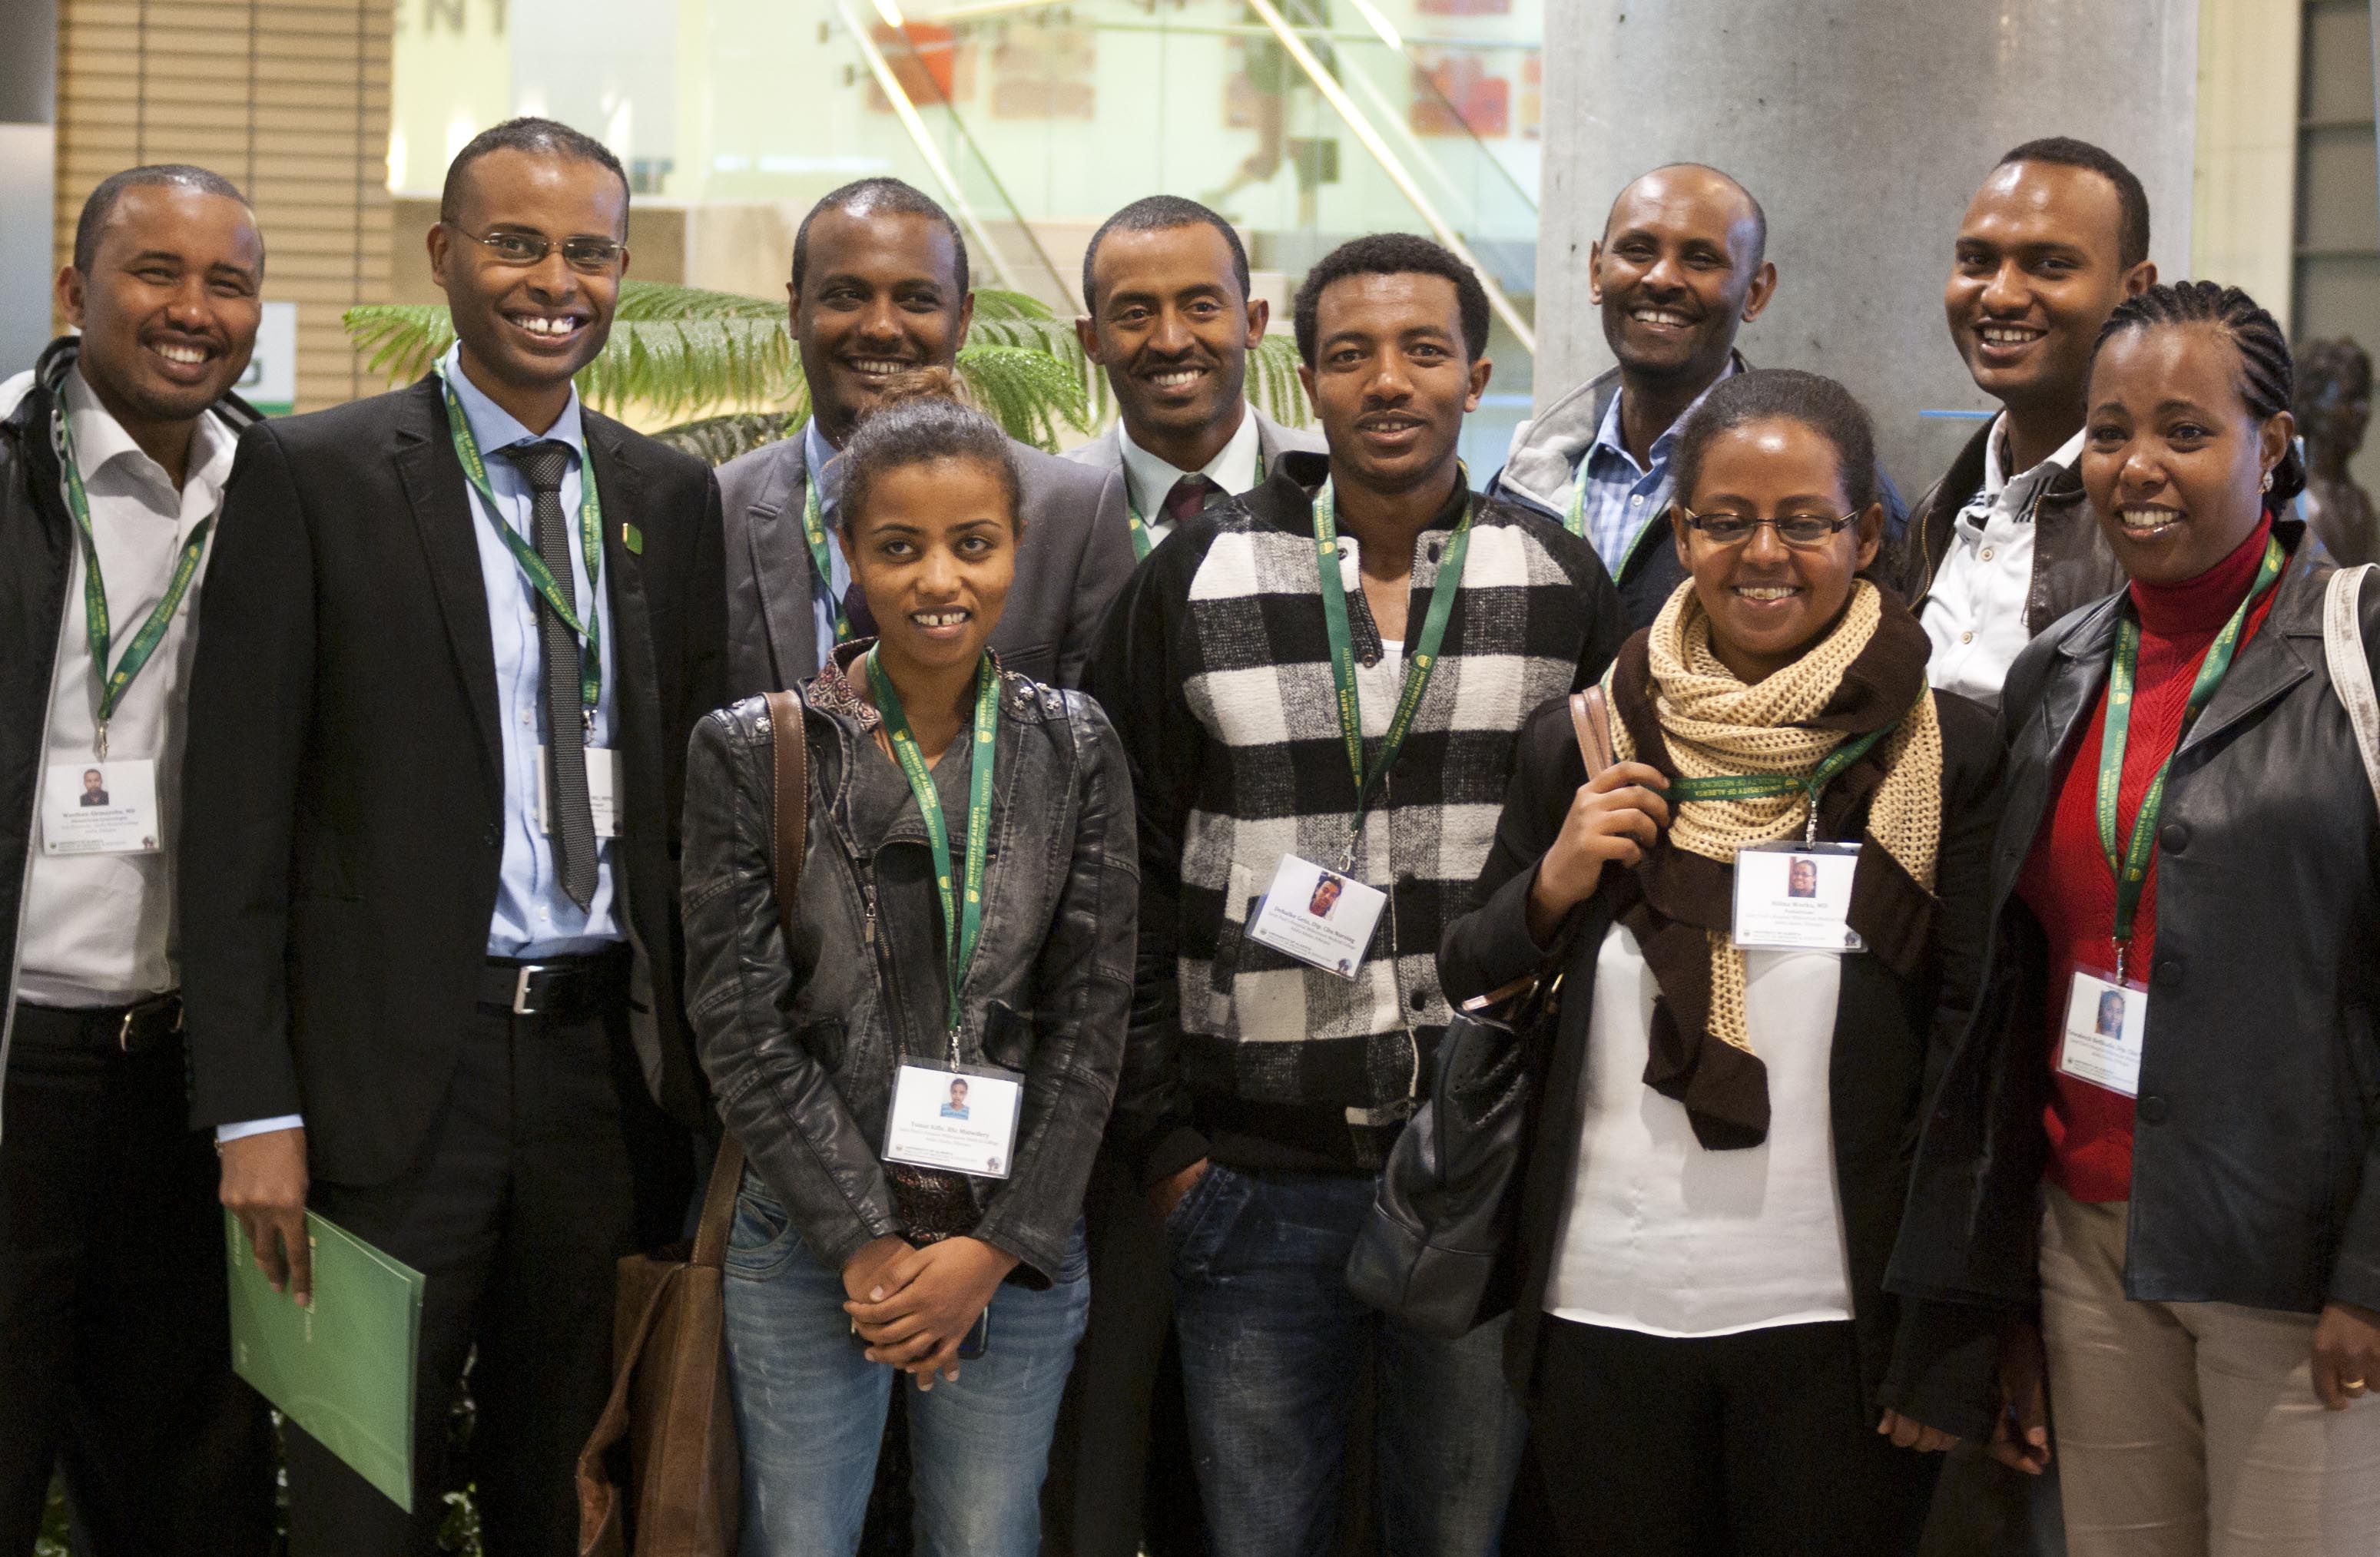 Visiting health professionals from Ethiopia